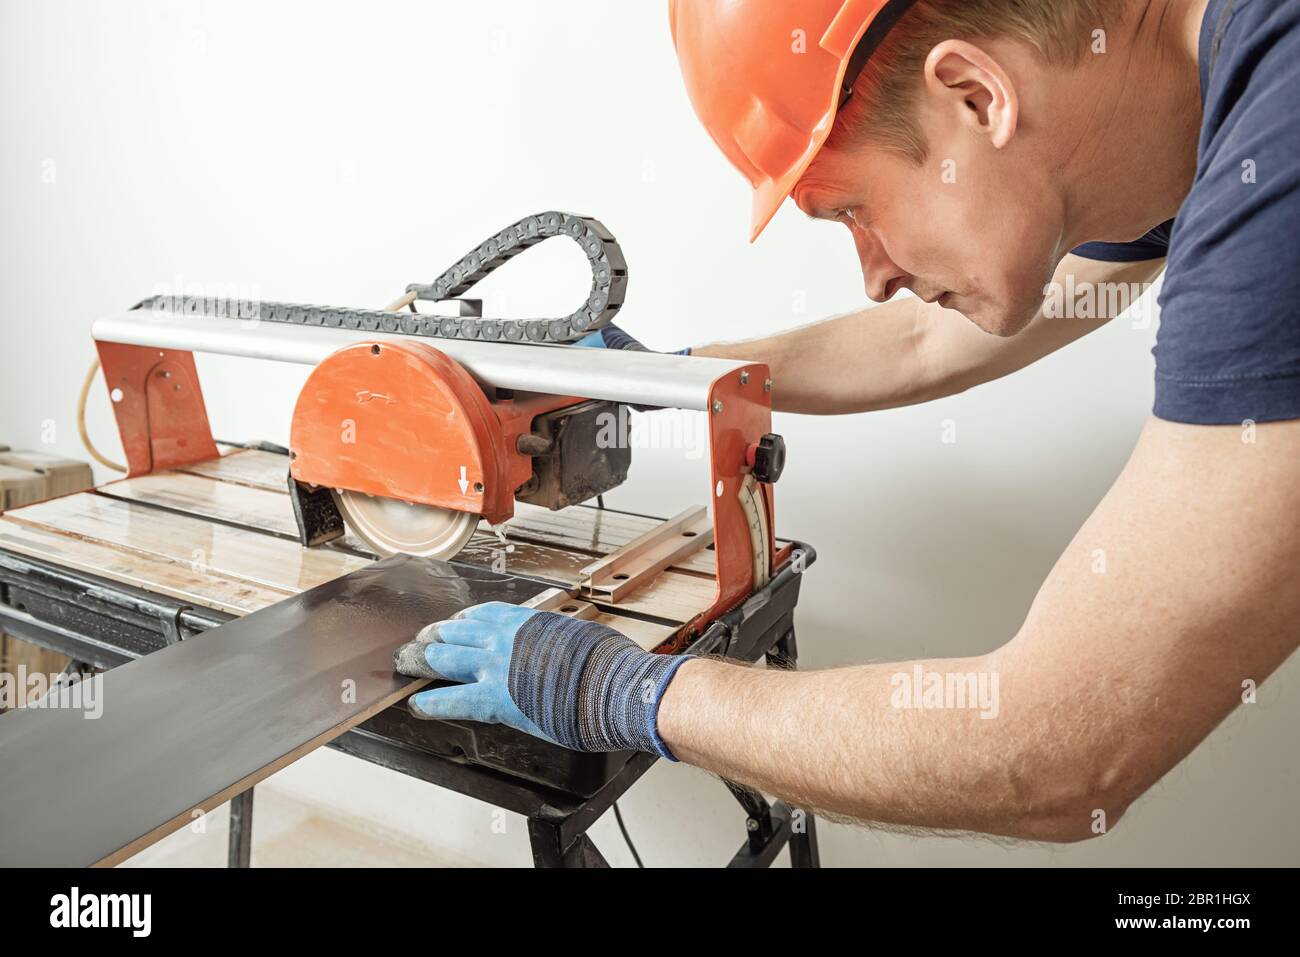 The worker is cutting a ceramic tile on a wet cutter saw machine Stock  Photo - Alamy